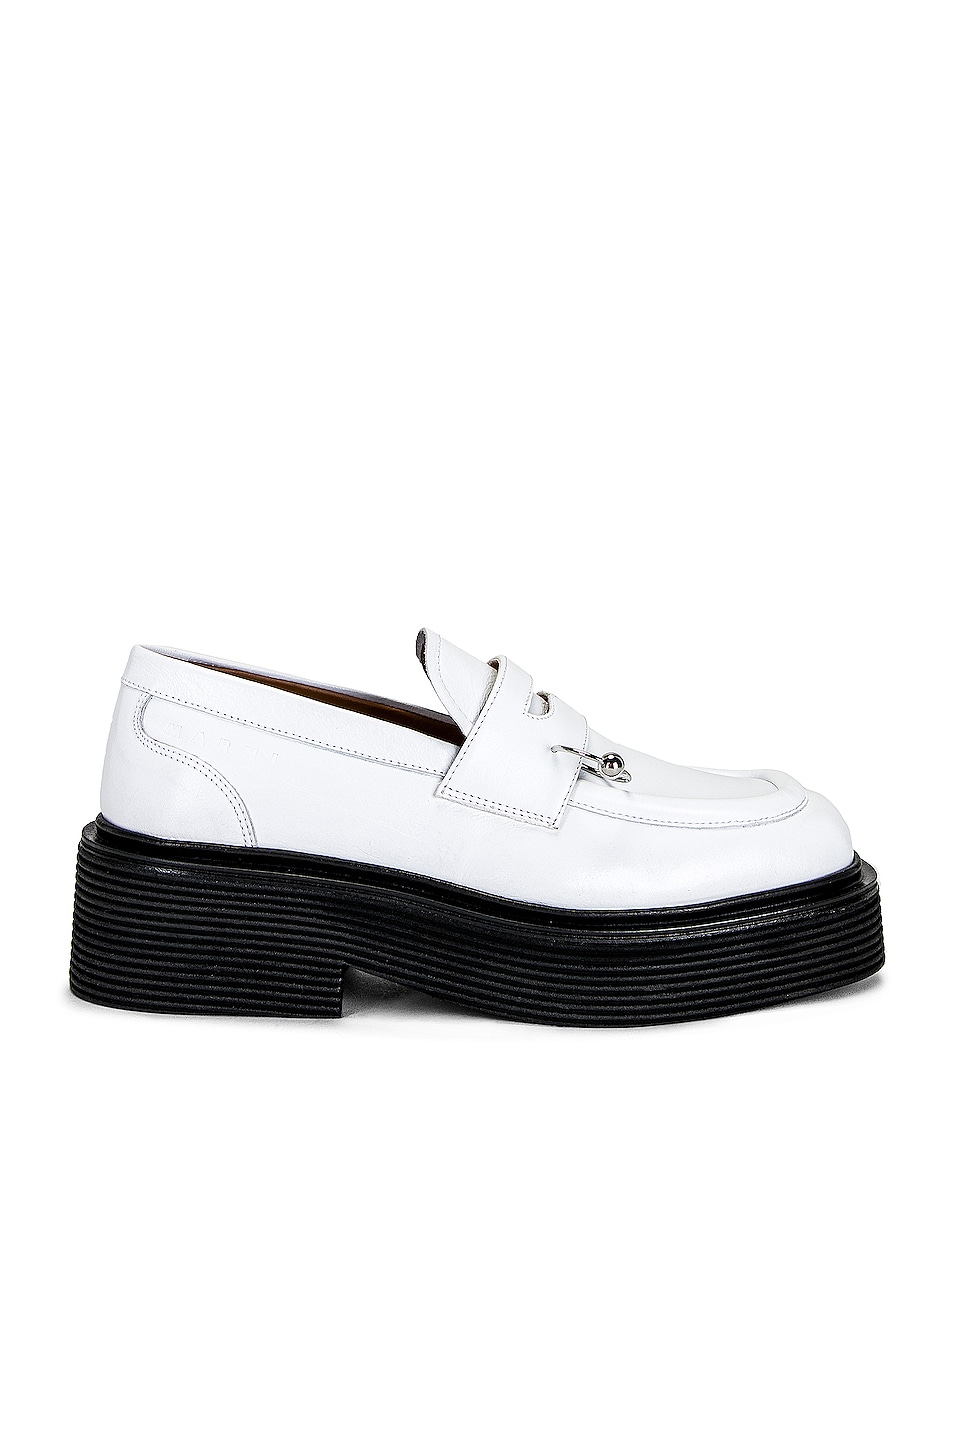 Image 1 of Marni Square Moccasins in Lily White